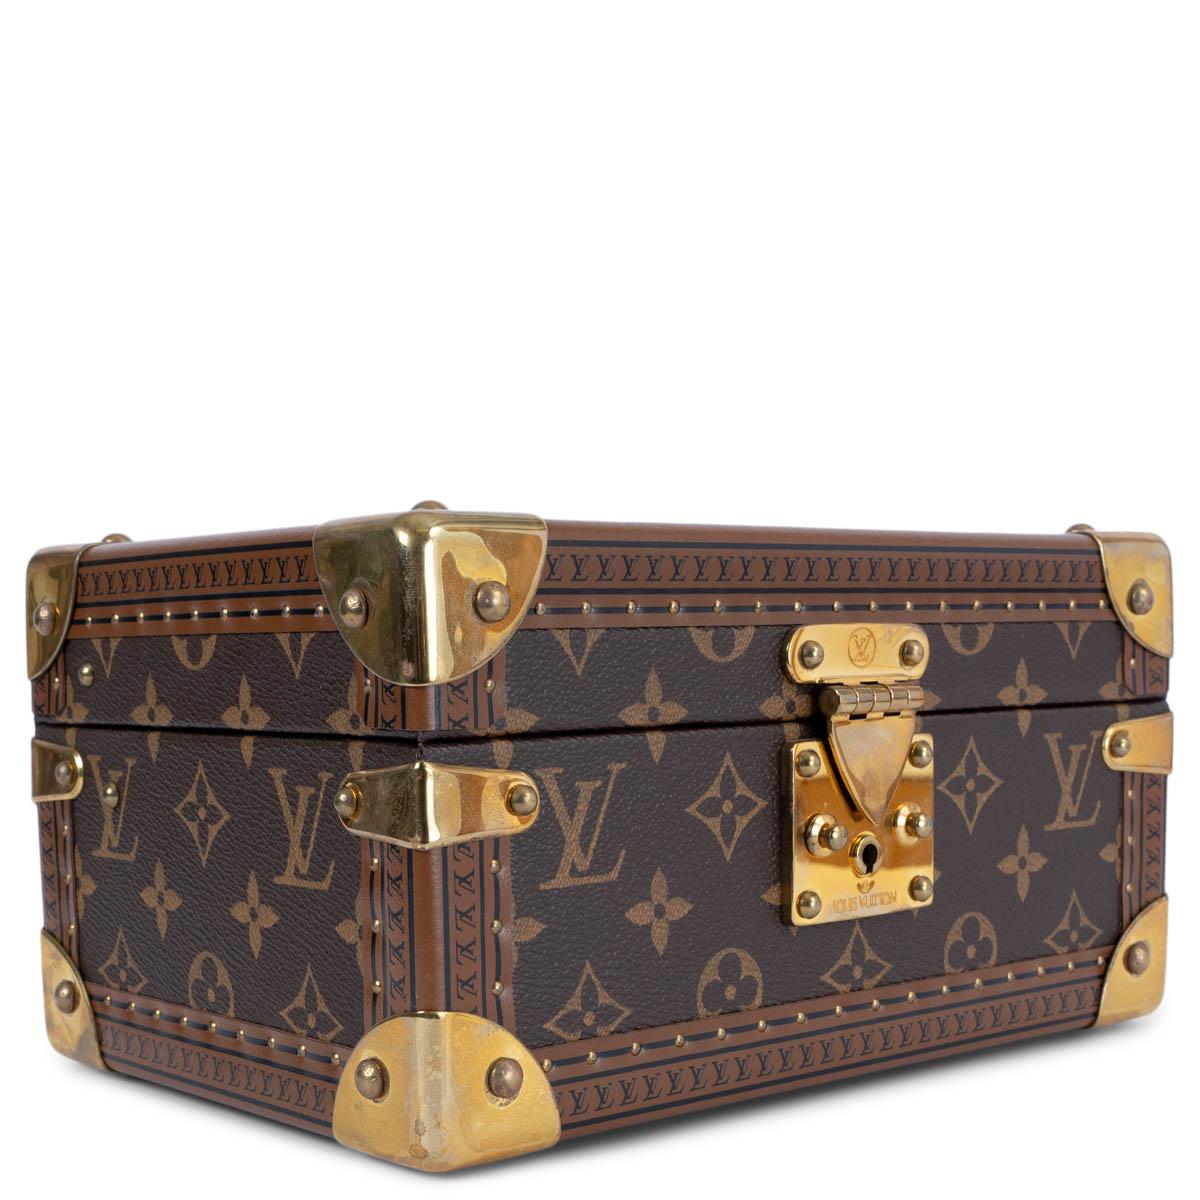 100% authentic Louis Vuitton Coffret Trésor 24 treasure case in Ebene brown Monogram canvas. Features hard shell, logo stamped leather trim with brass rivets and corner reinforcements. Closes with a brass lock on the front. Lined in cream microfiber